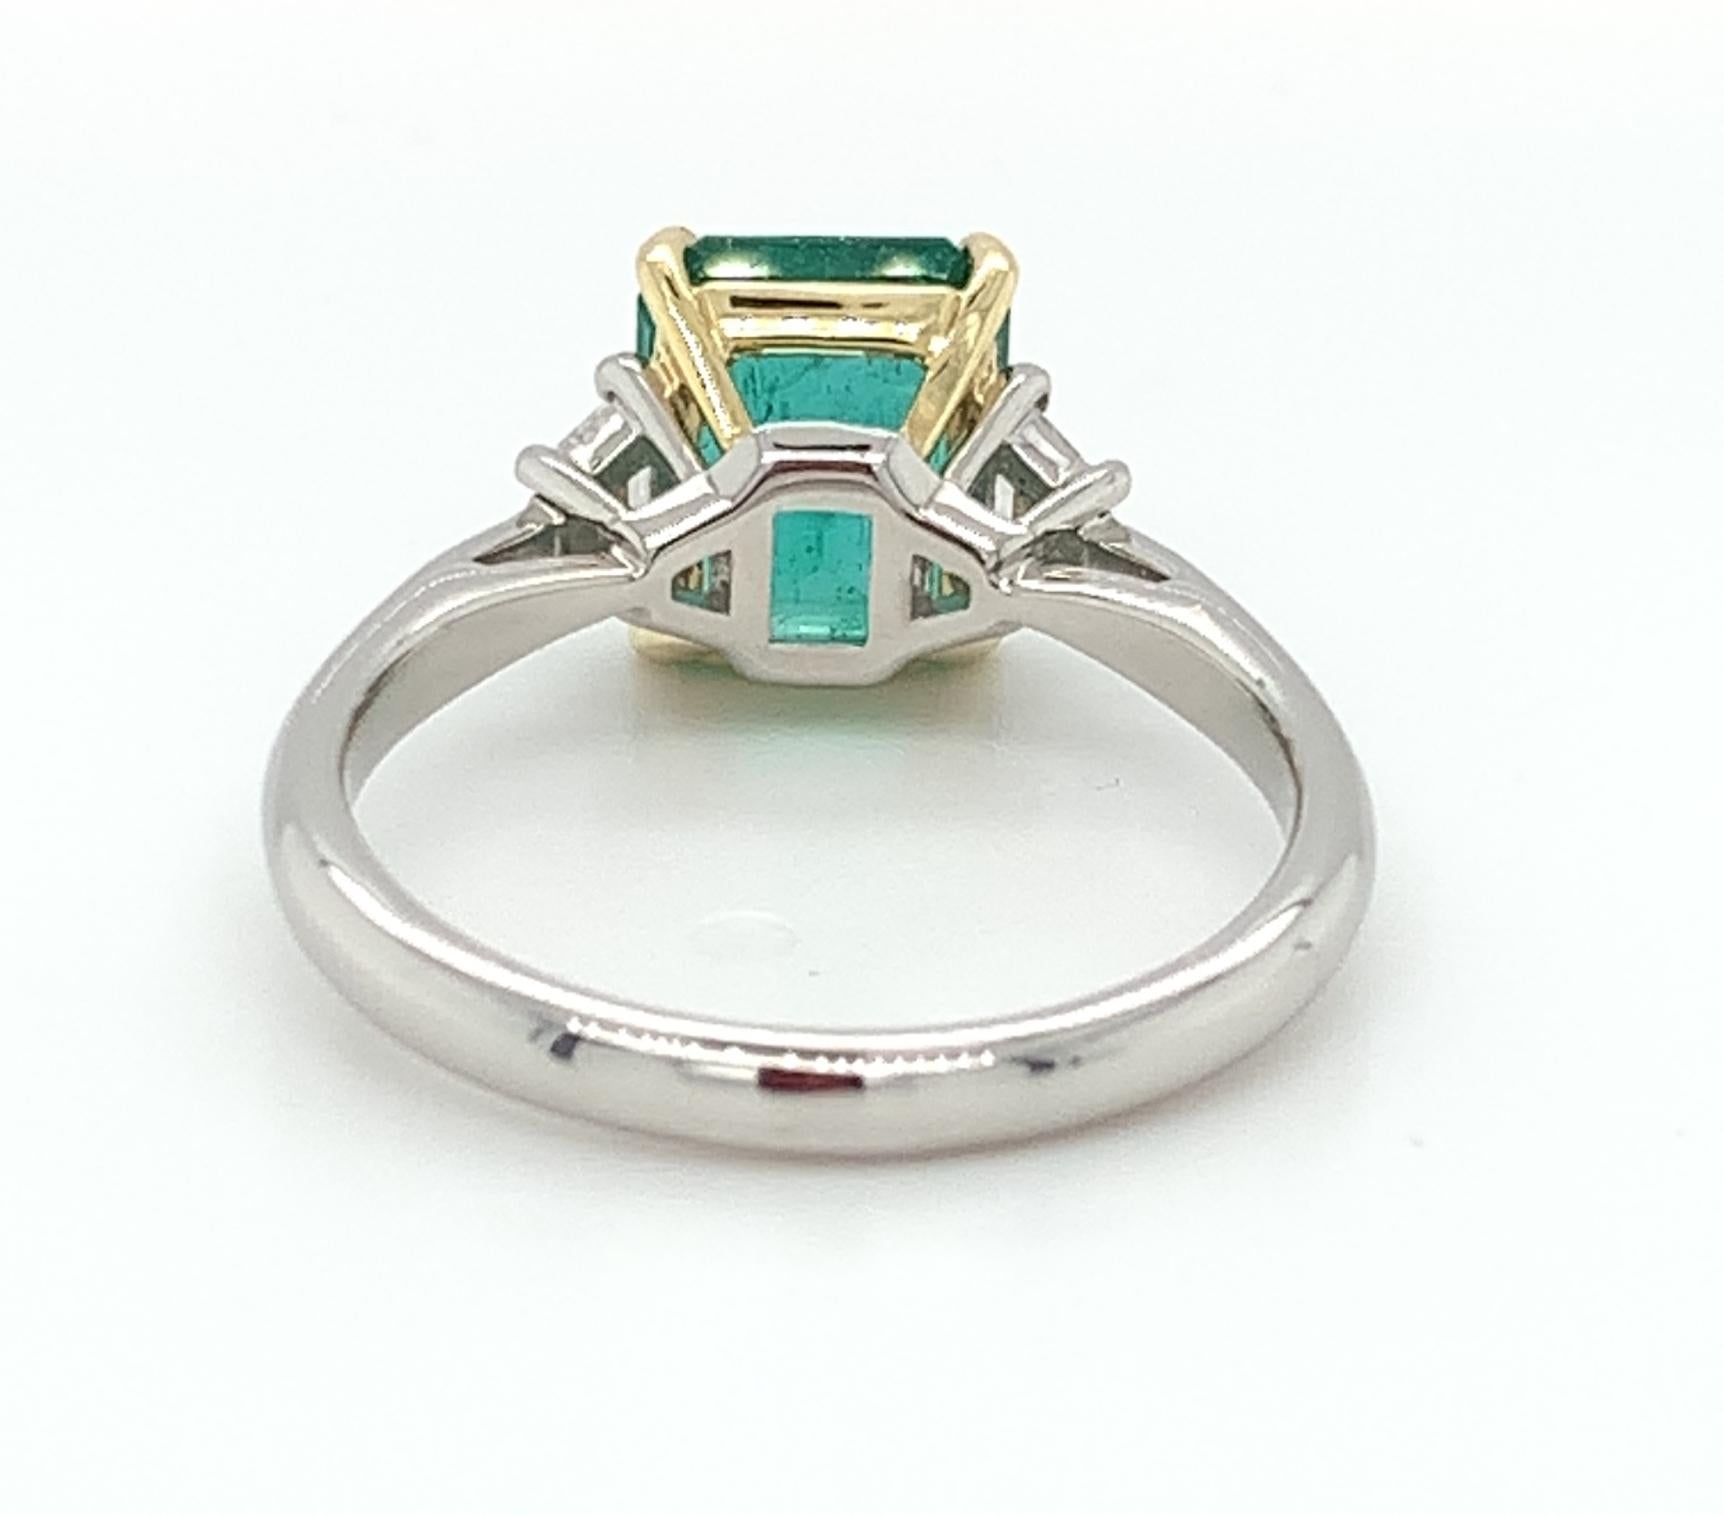 2.25 Carat Emerald and Diamond Engagement Ring in Platinum and Yellow Gold For Sale 3